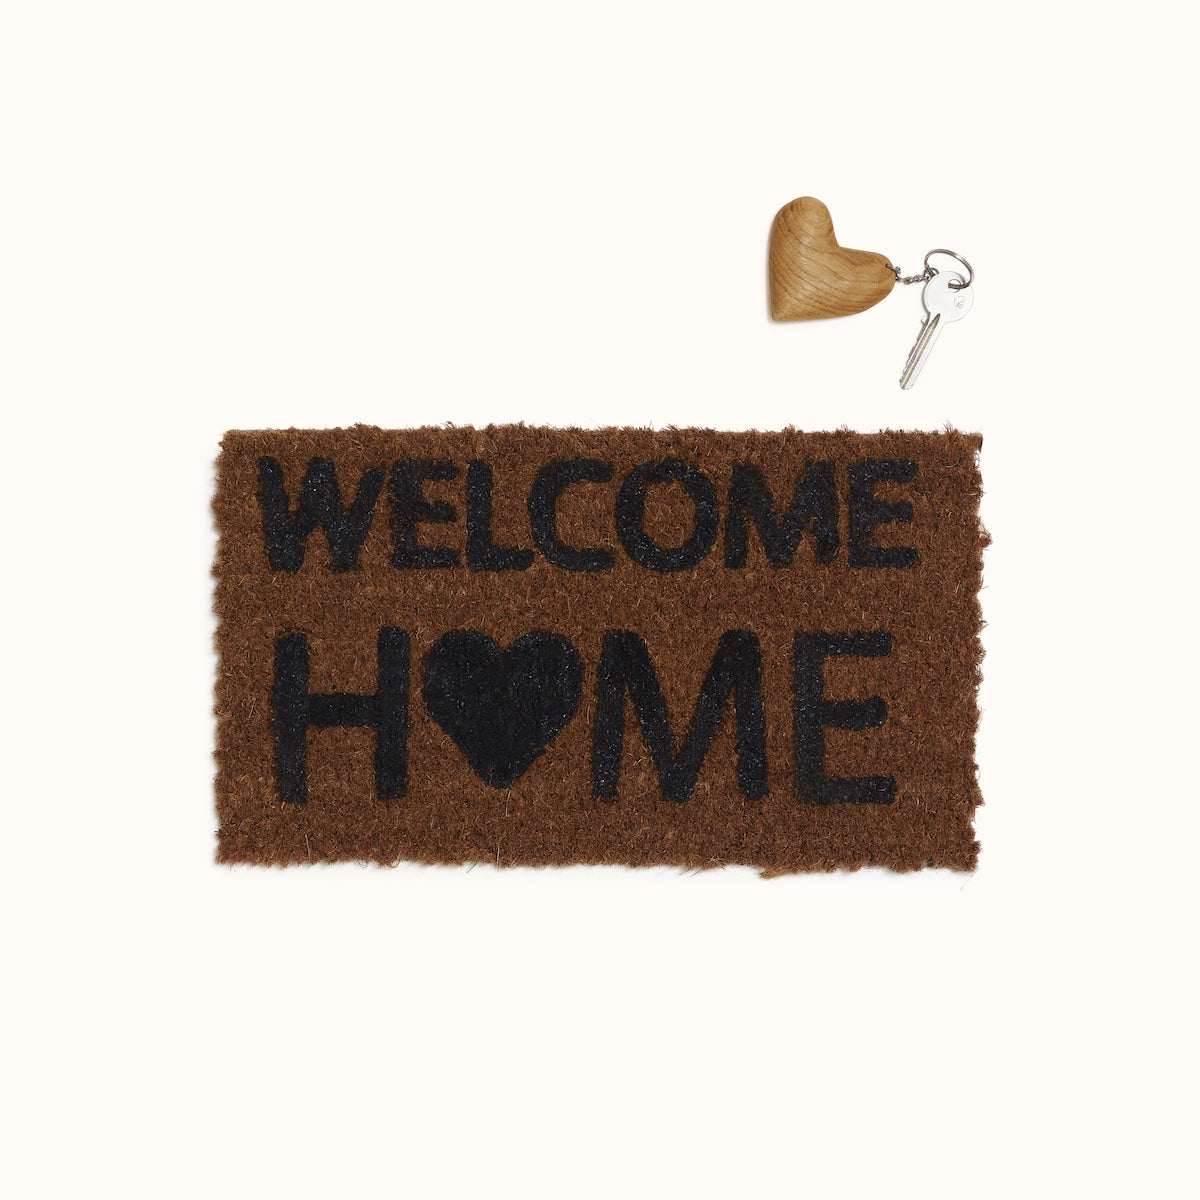 A coir entrance mat with the text Welcome Home, and a key with a wooden keyring attached to it on the top right side of the mat.